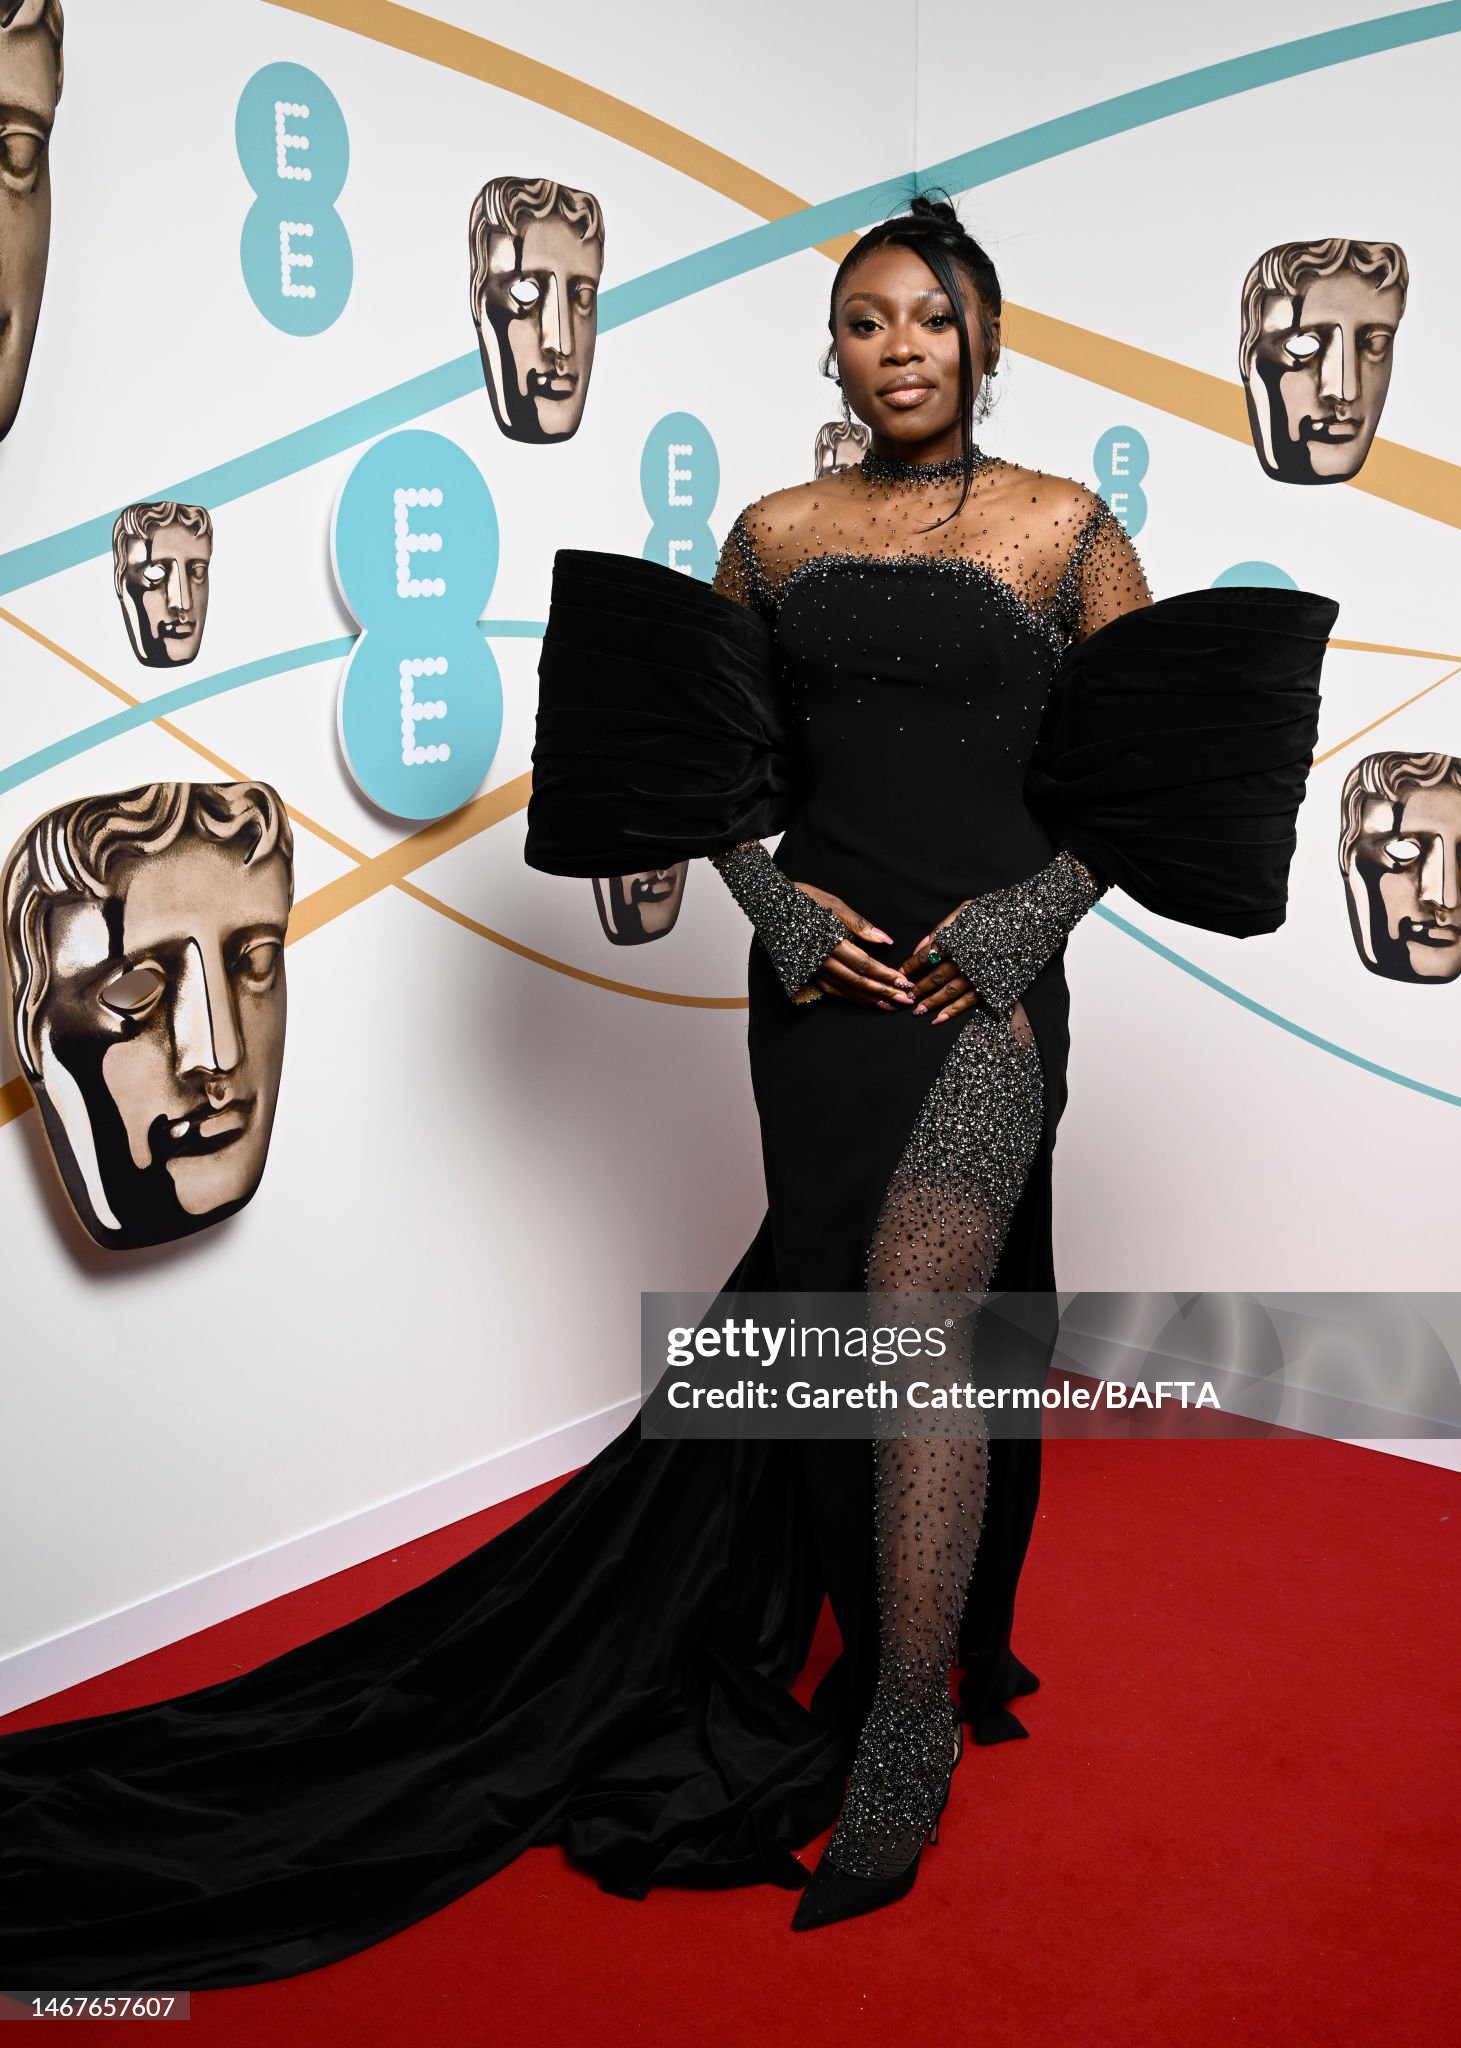 patricia-bright-attends-the-ee-bafta-film-awards-2023-at-the-royal-festival-hall-on-february.jpg